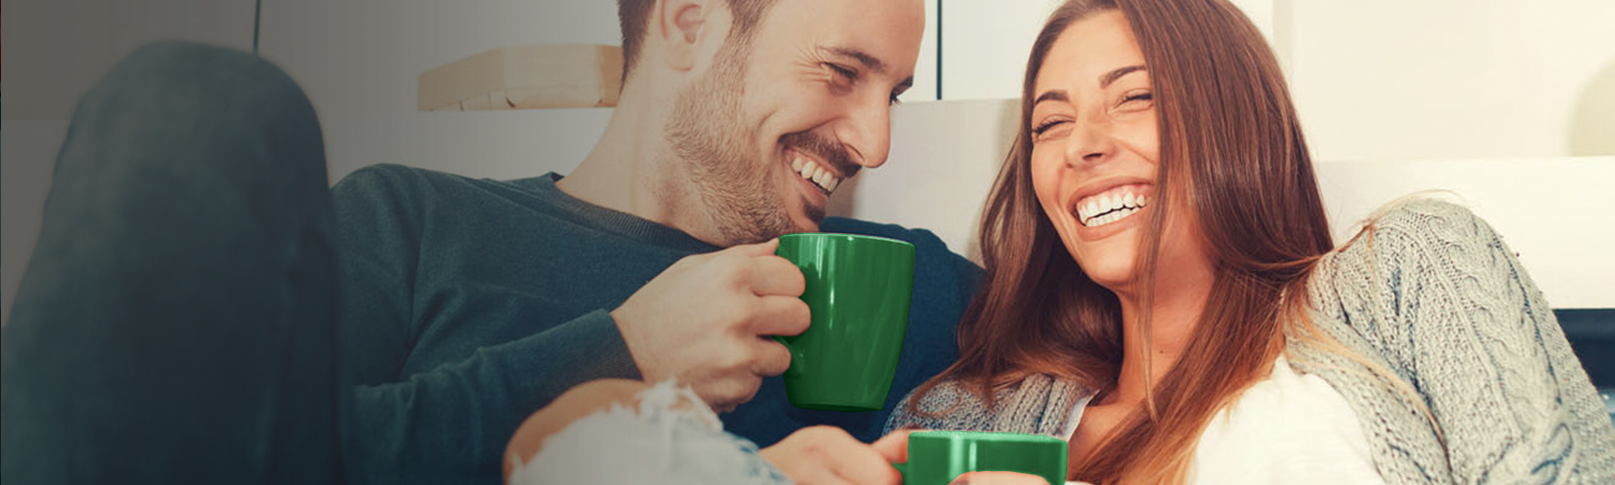 couple on couch laughing with coffee cups